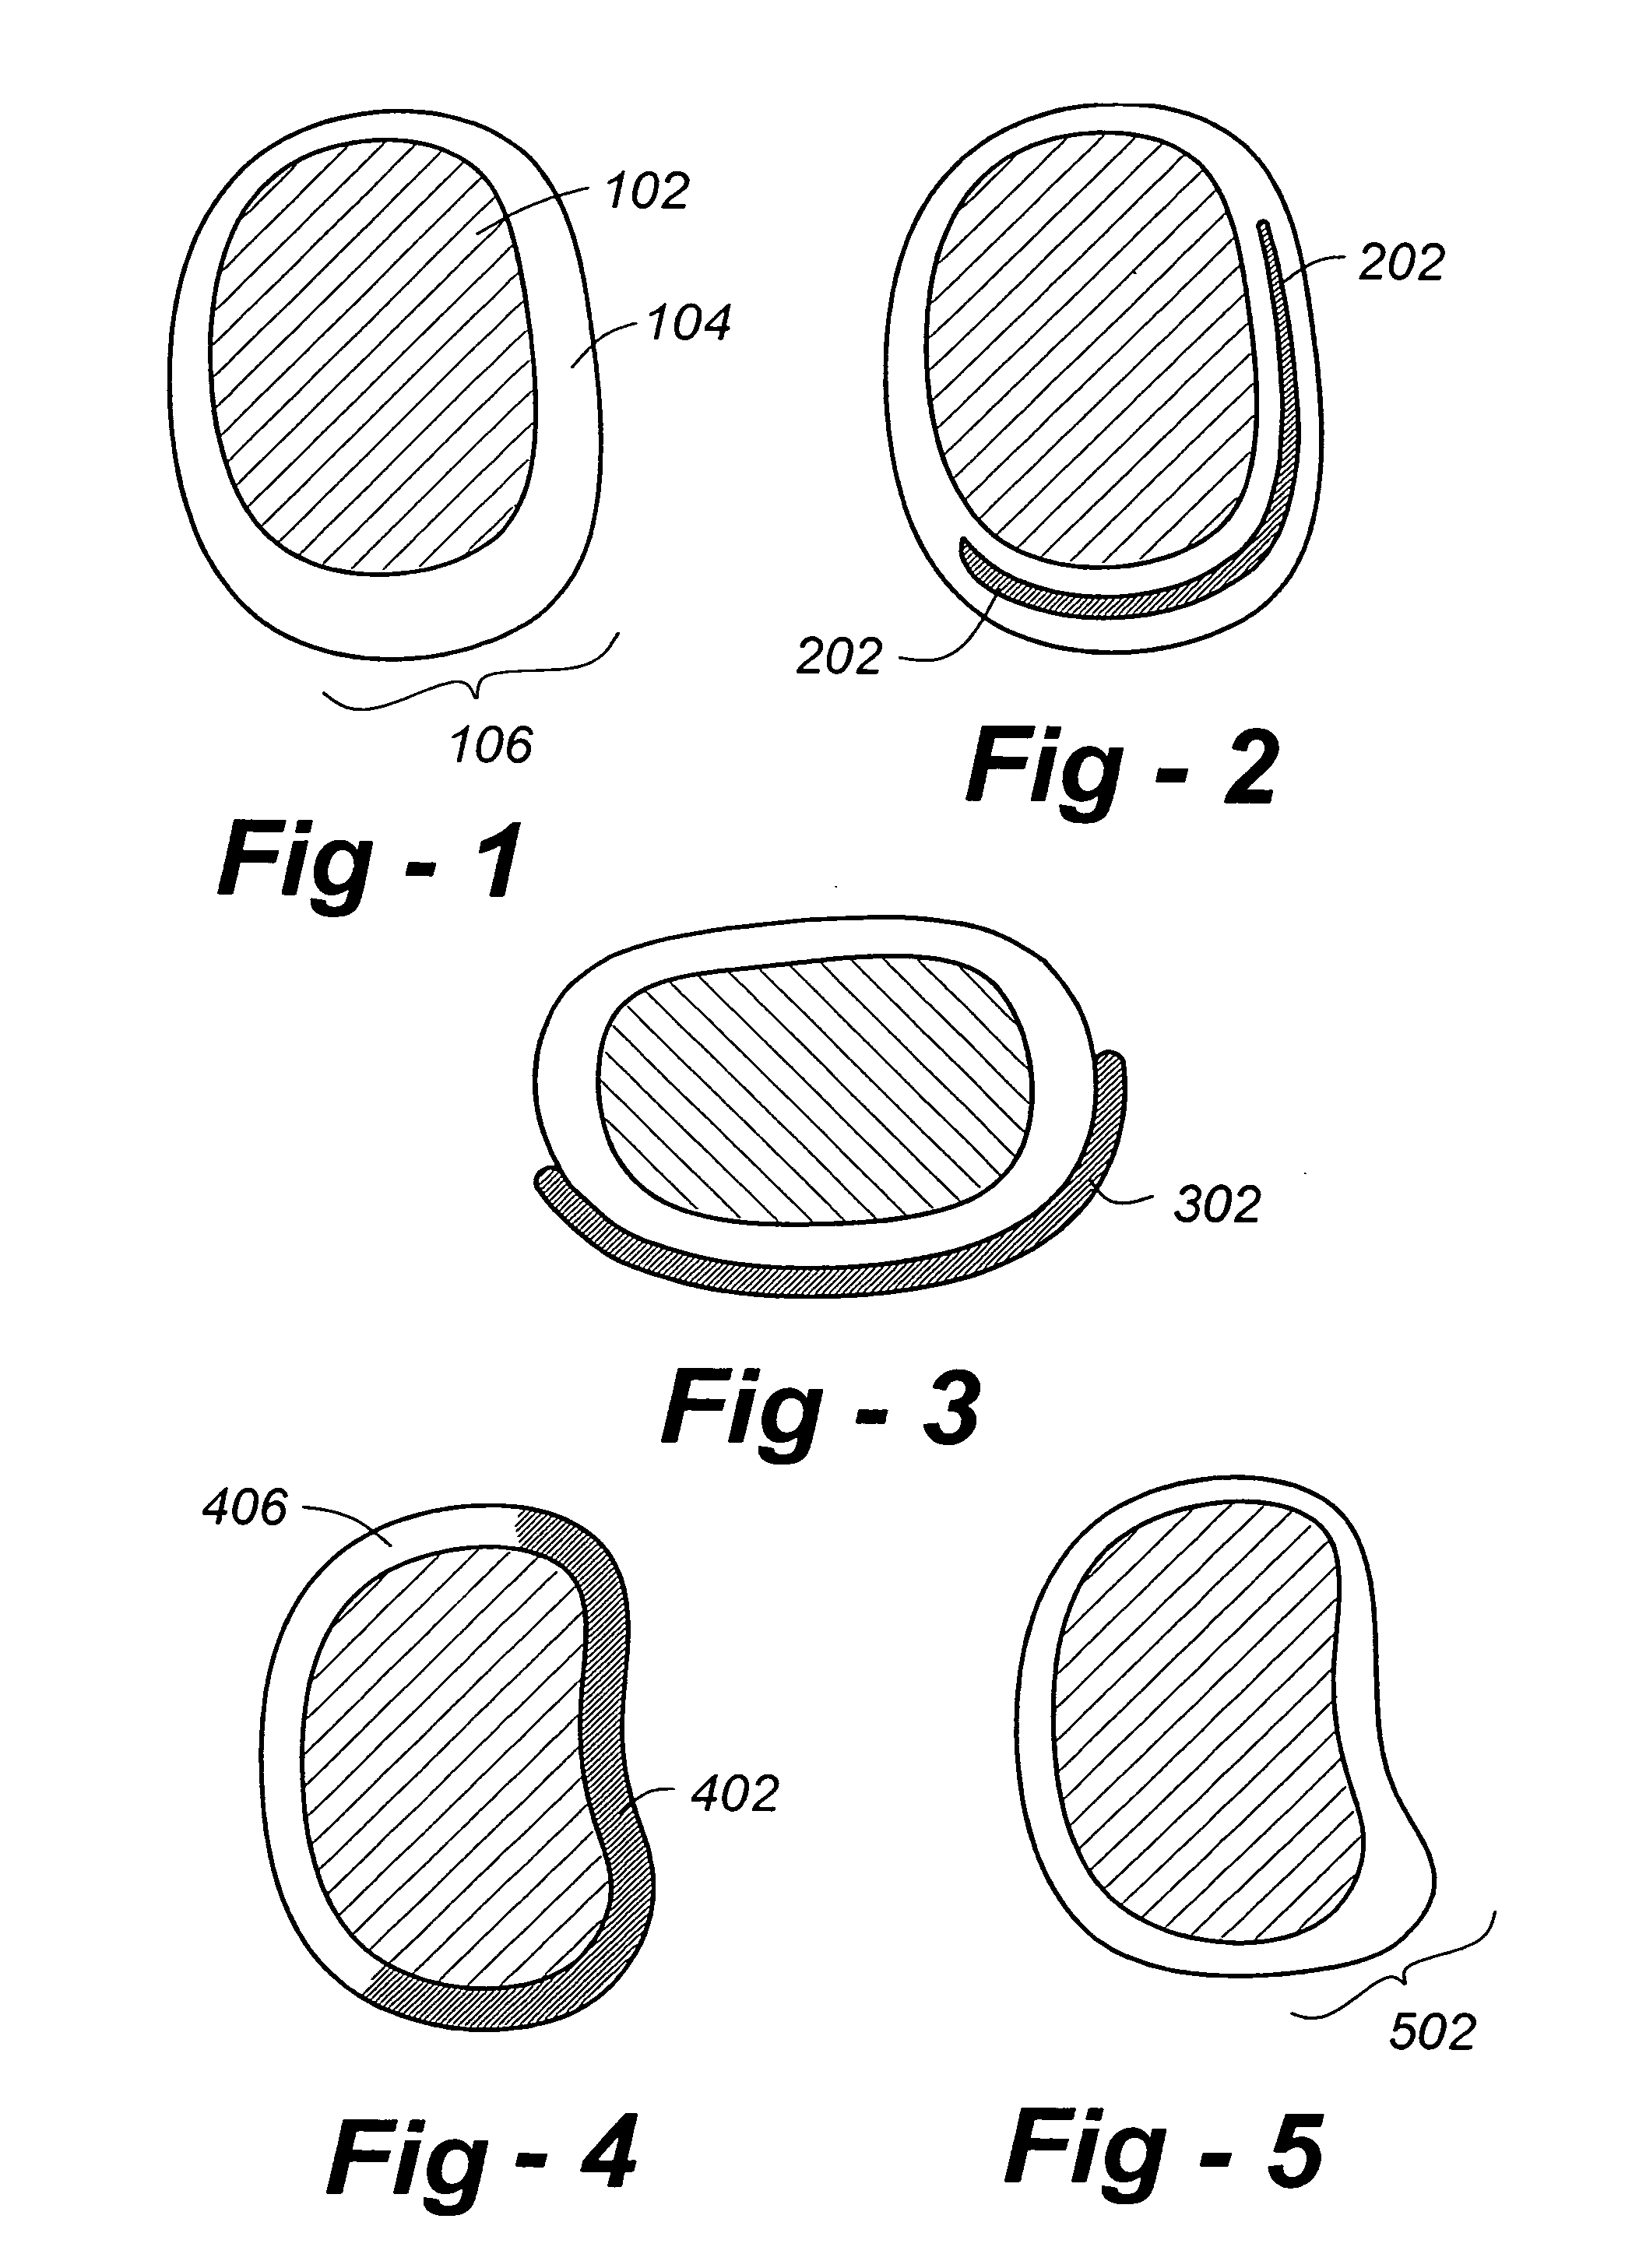 Artificial intervertebral disc replacements incorporating reinforced wall sections